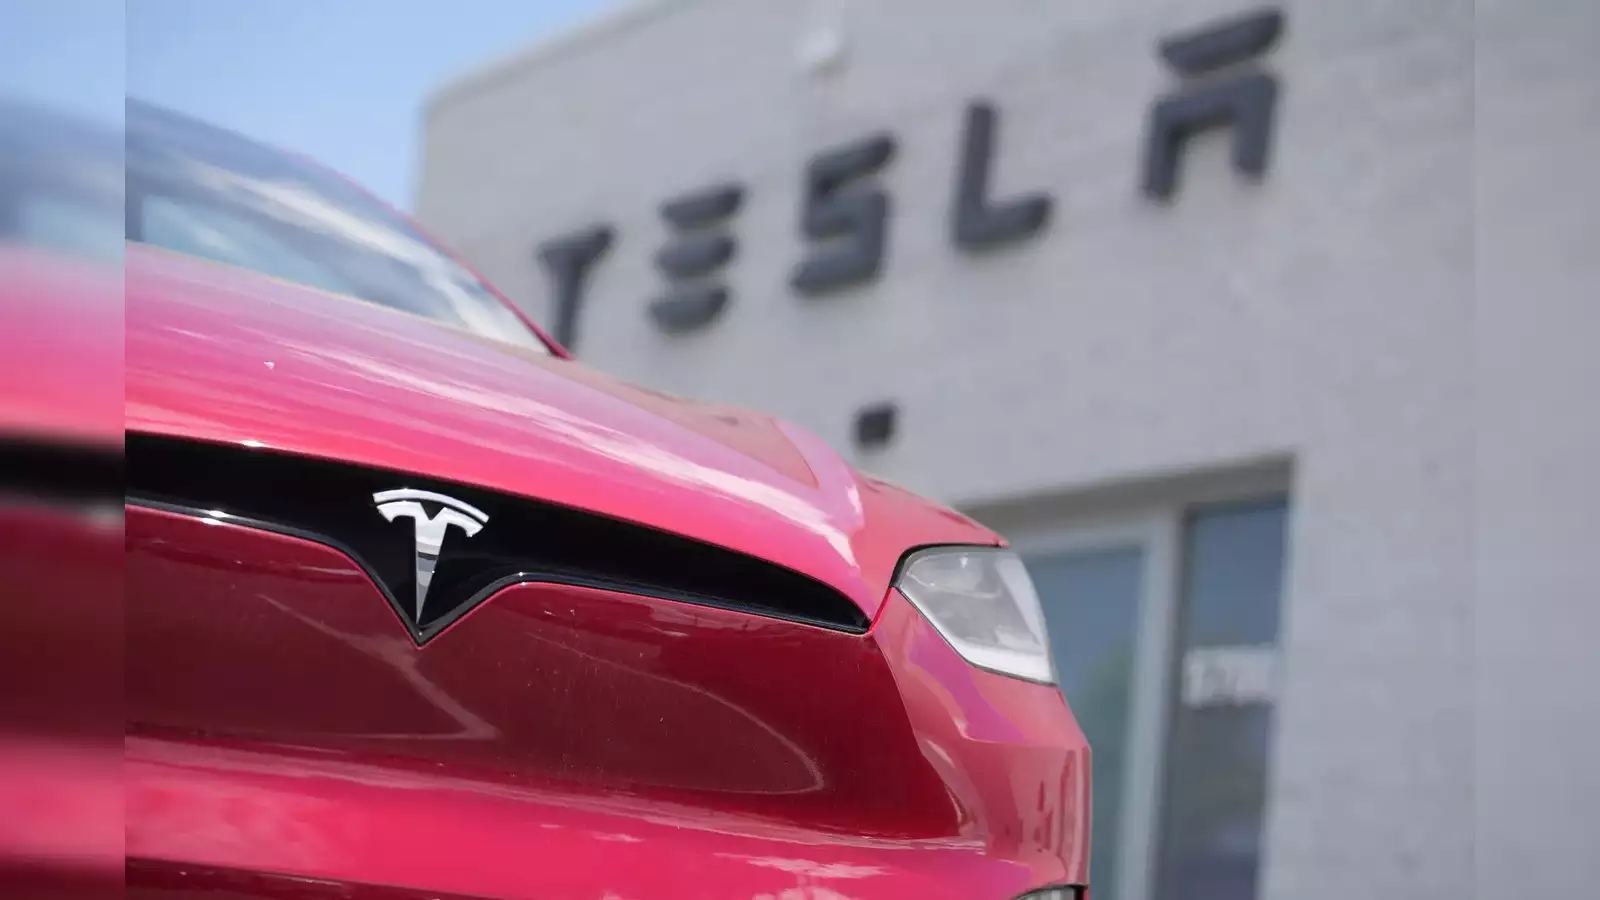 Tesla Is Set To Launch Affordable Electric Cars Soon Giving Millions of Its Fans an Economical Alternative